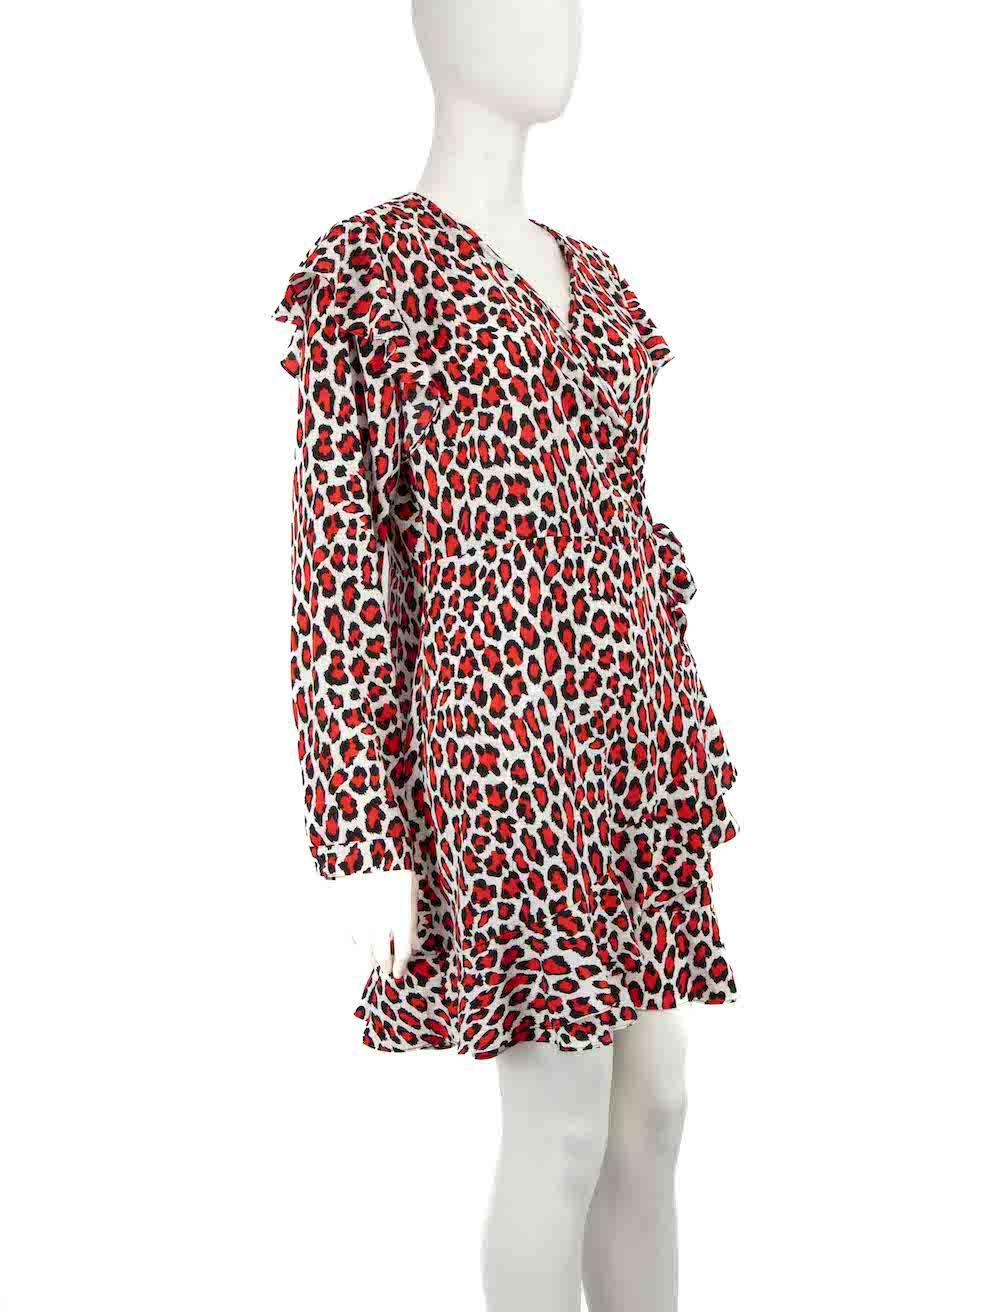 CONDITION is Very good. Hardly any visible wear to dress is evident on this used Robert Rodriguez designer resale item.
 
 Details
 Red
 Polyester
 Dress
 Leopard print
 Long sleeves
 V-neck
 Mini
 Ruffle trim
 Front tie fastening
 Side zip